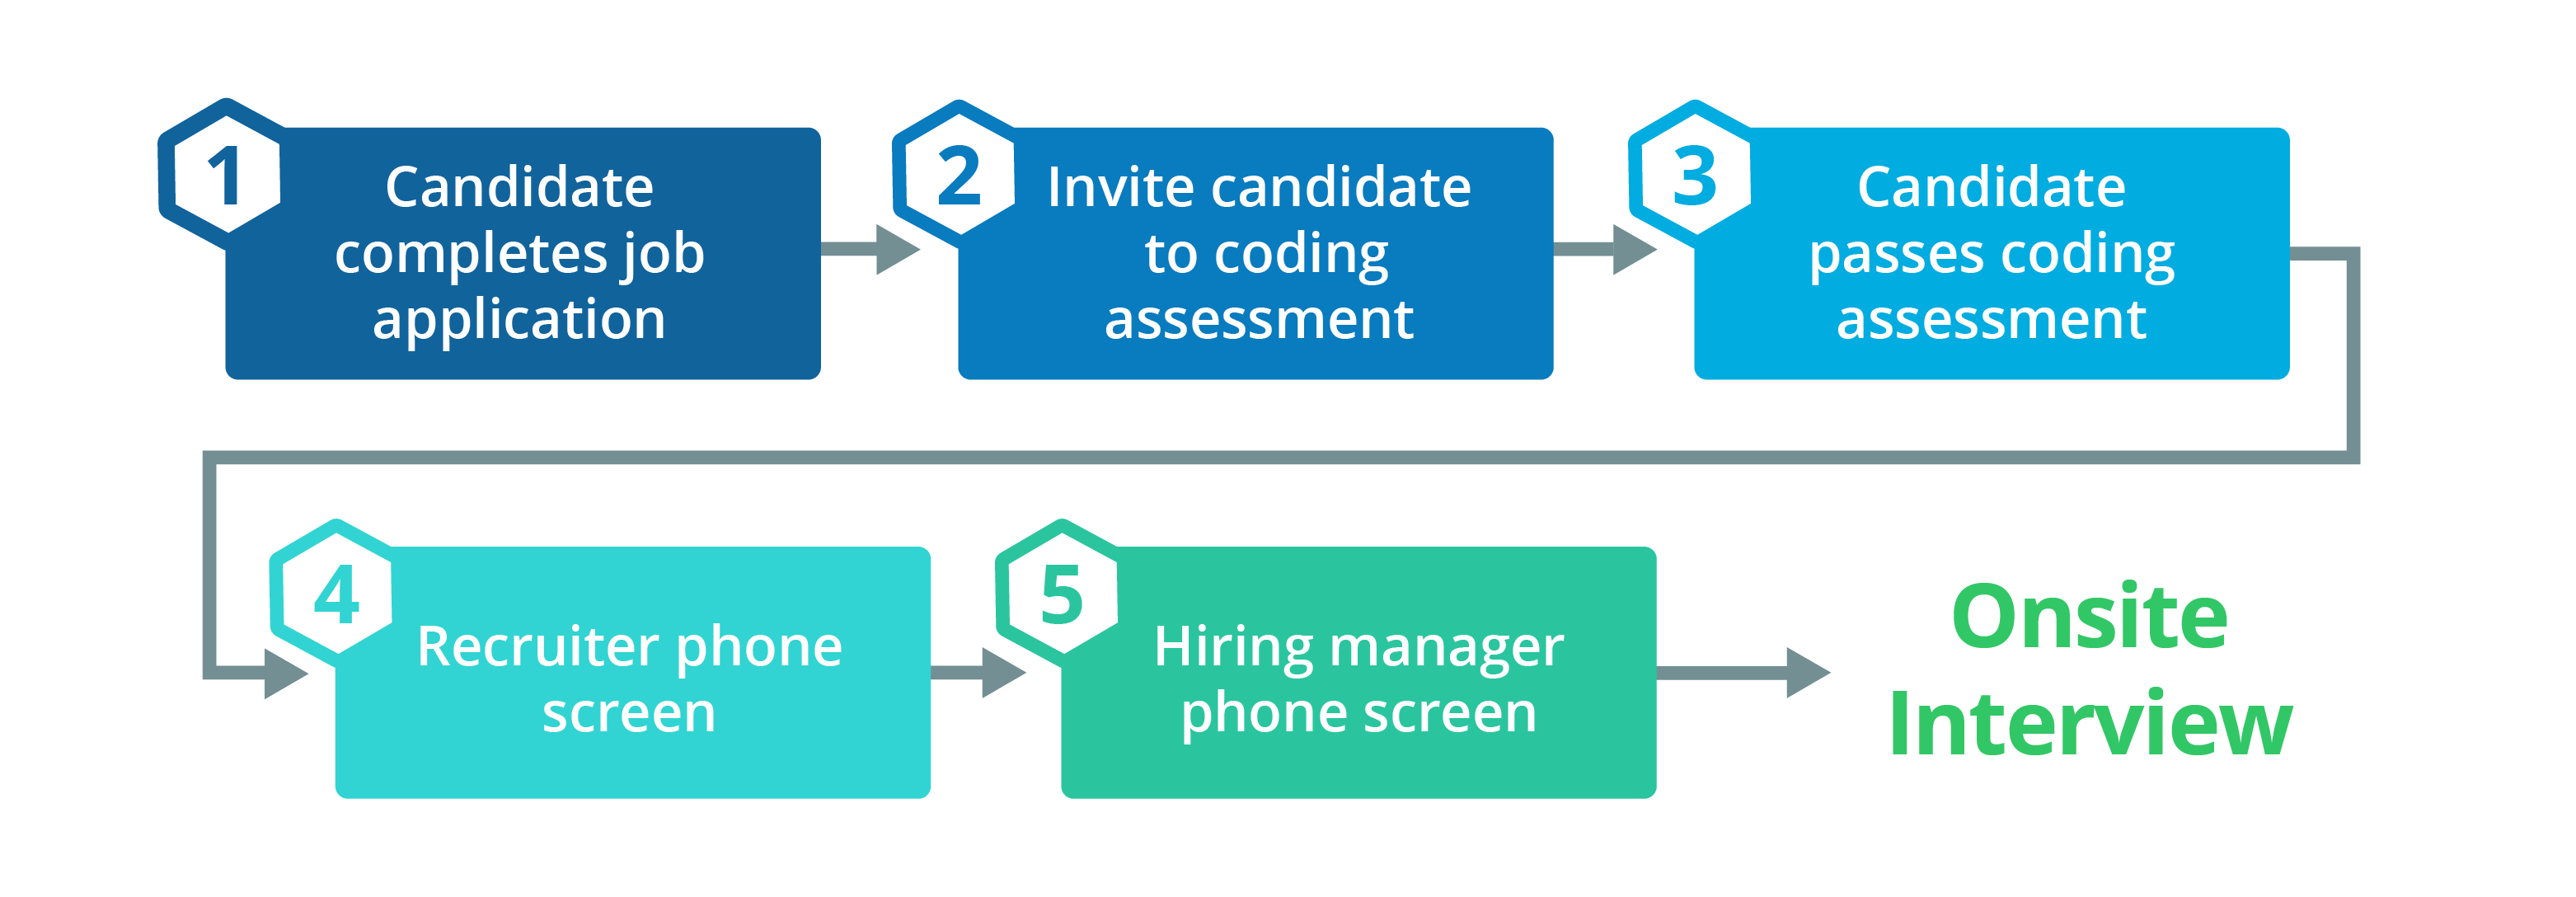 candidate-engagement-workflow-1